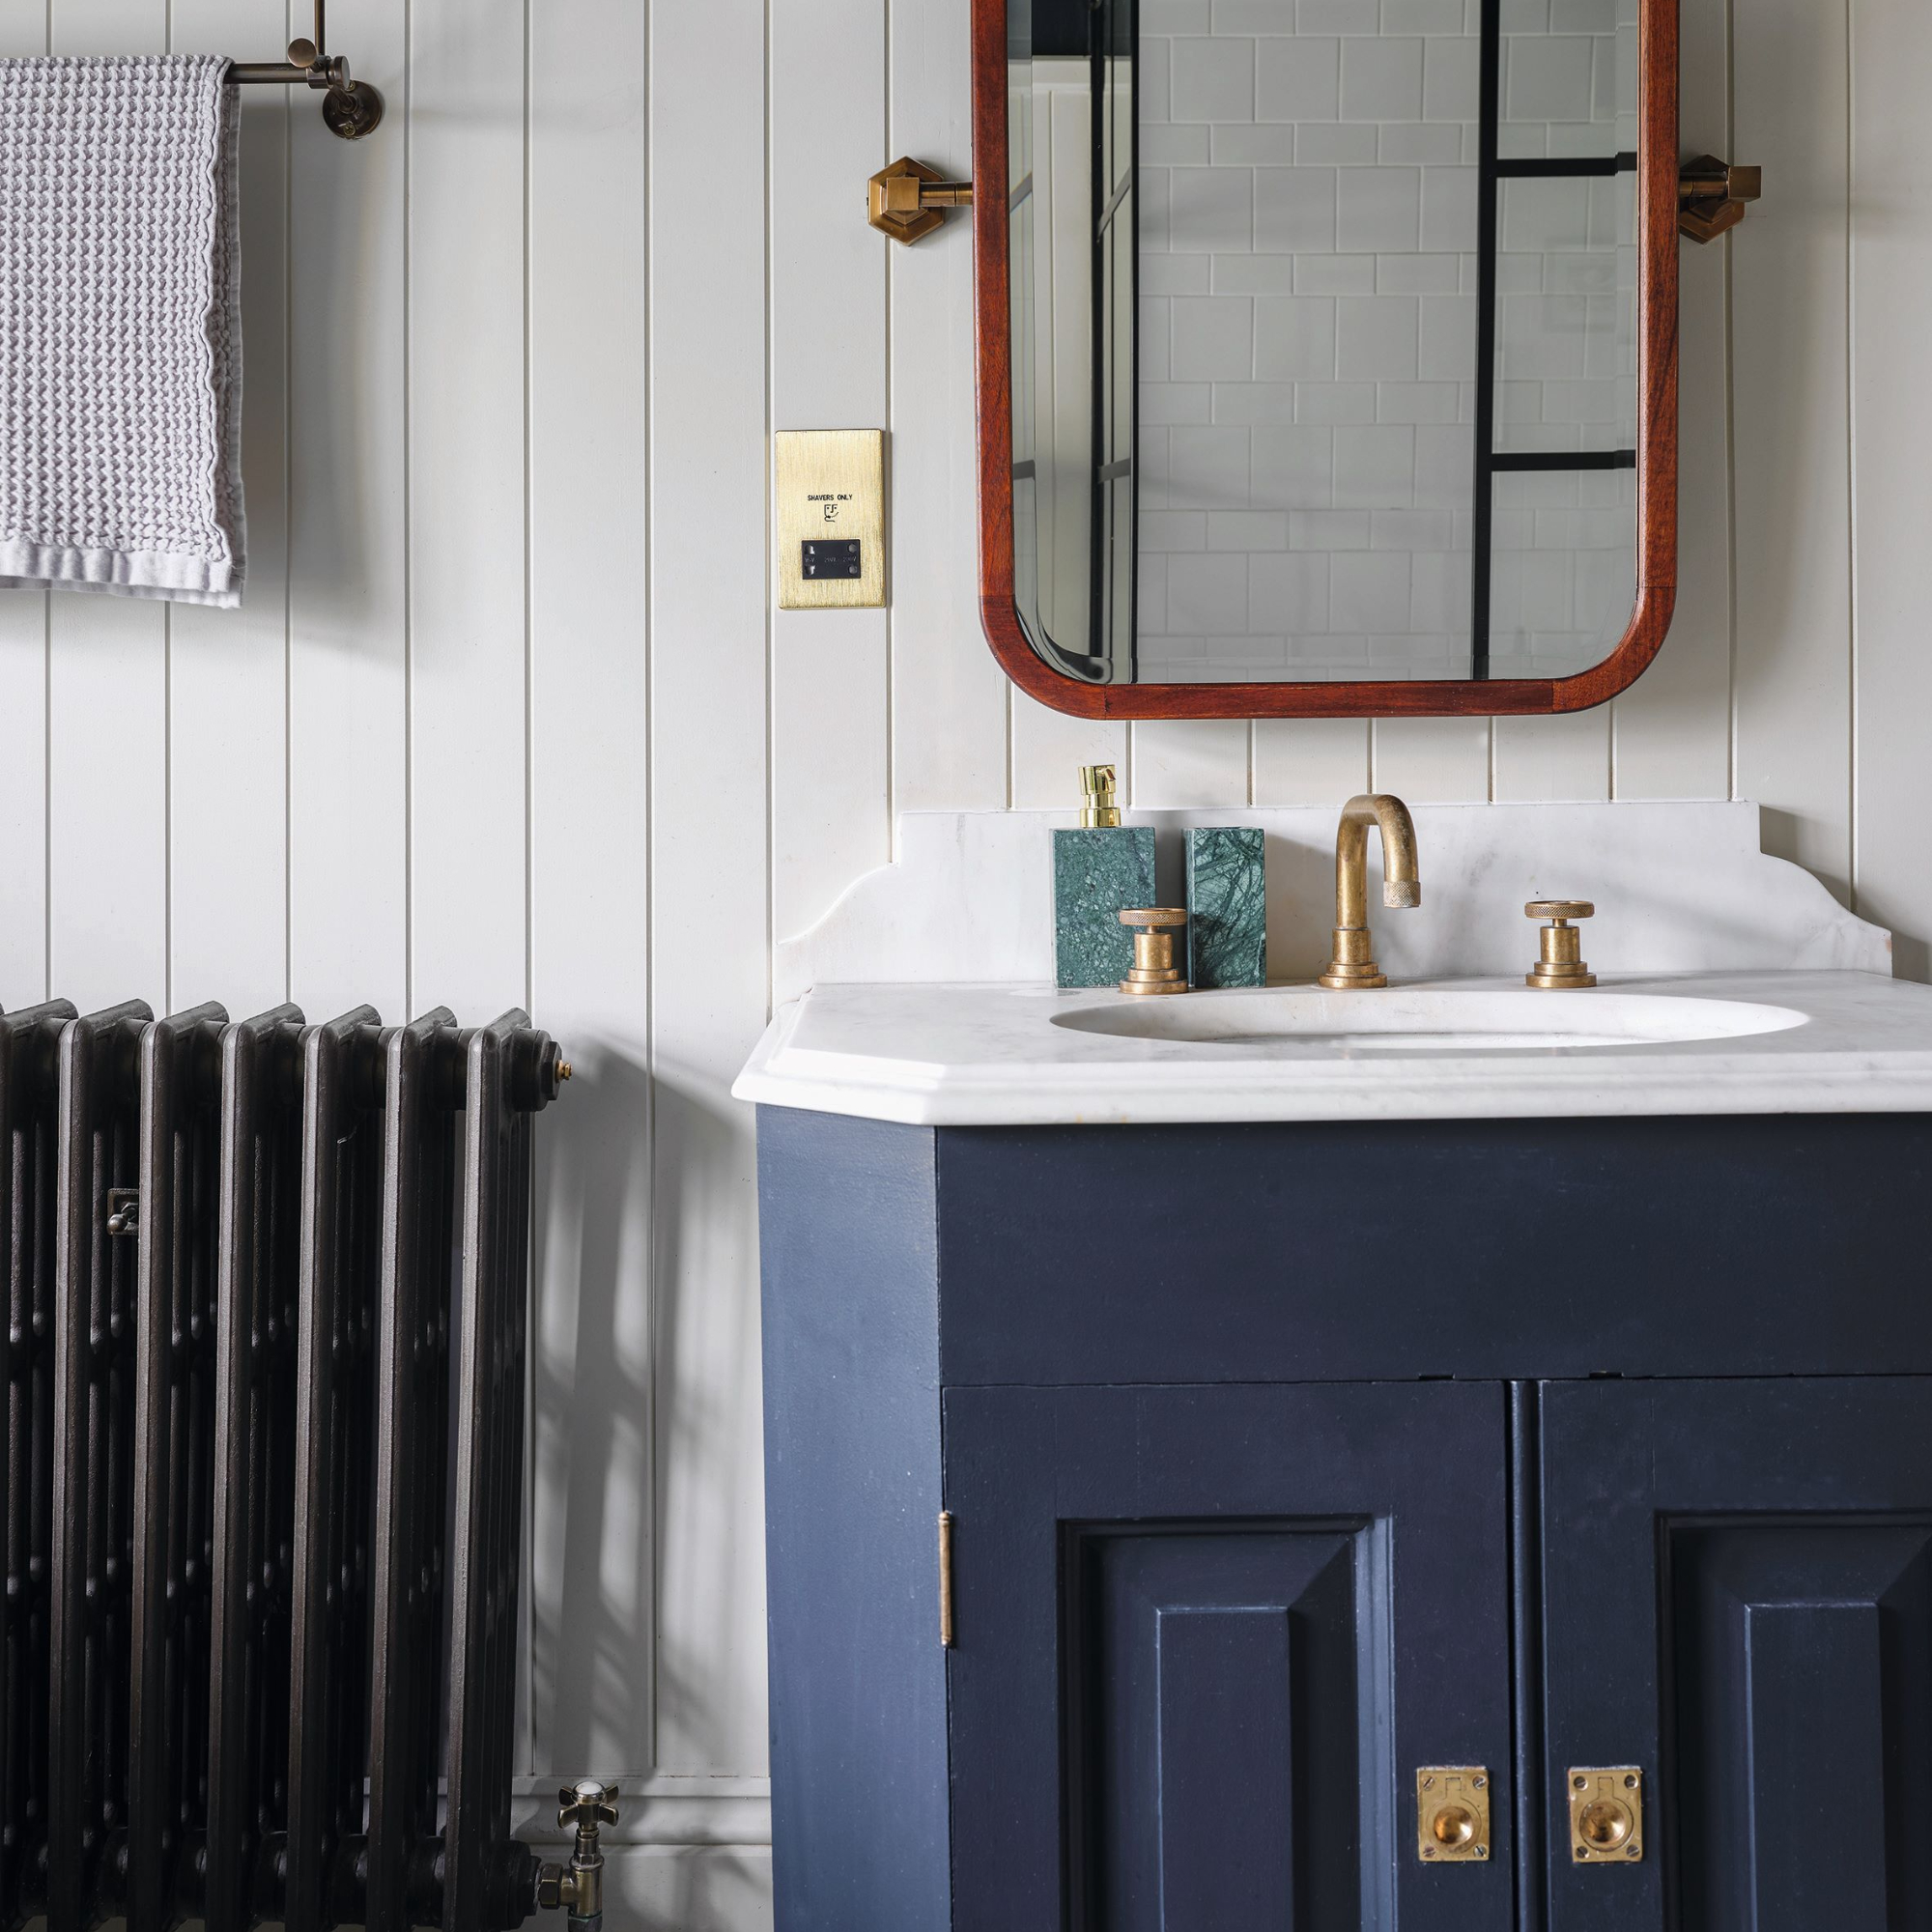 Handbasin with white and grey marbled top, blue vanity unit, wood panelled wall and original cast iron radiator